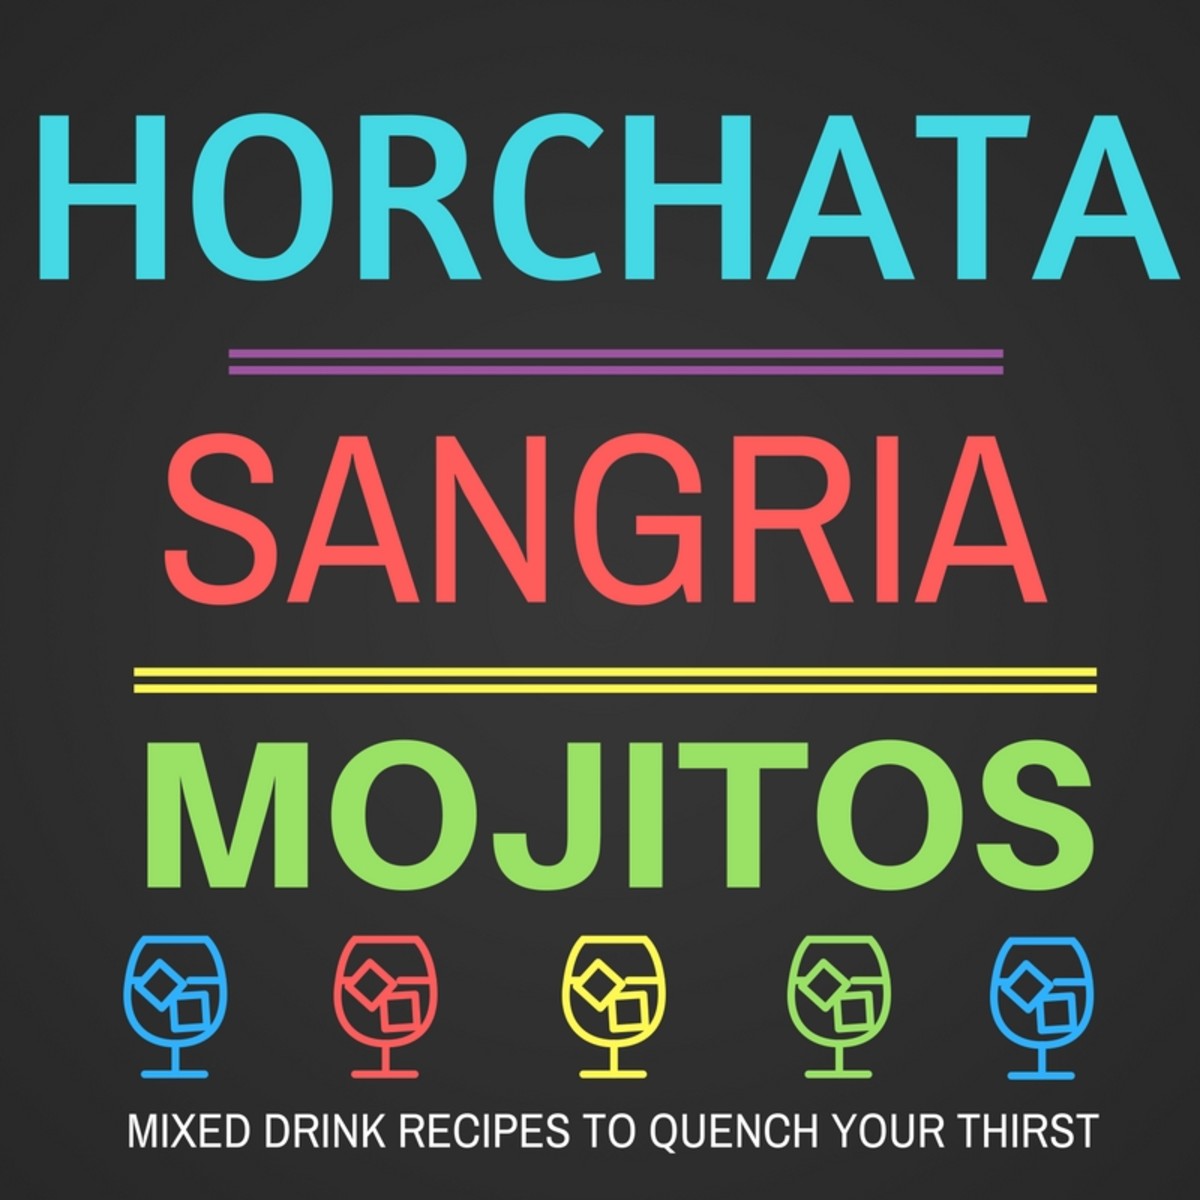 Horchata, Sangria and Mojitos - 3 Great Summer Drinks